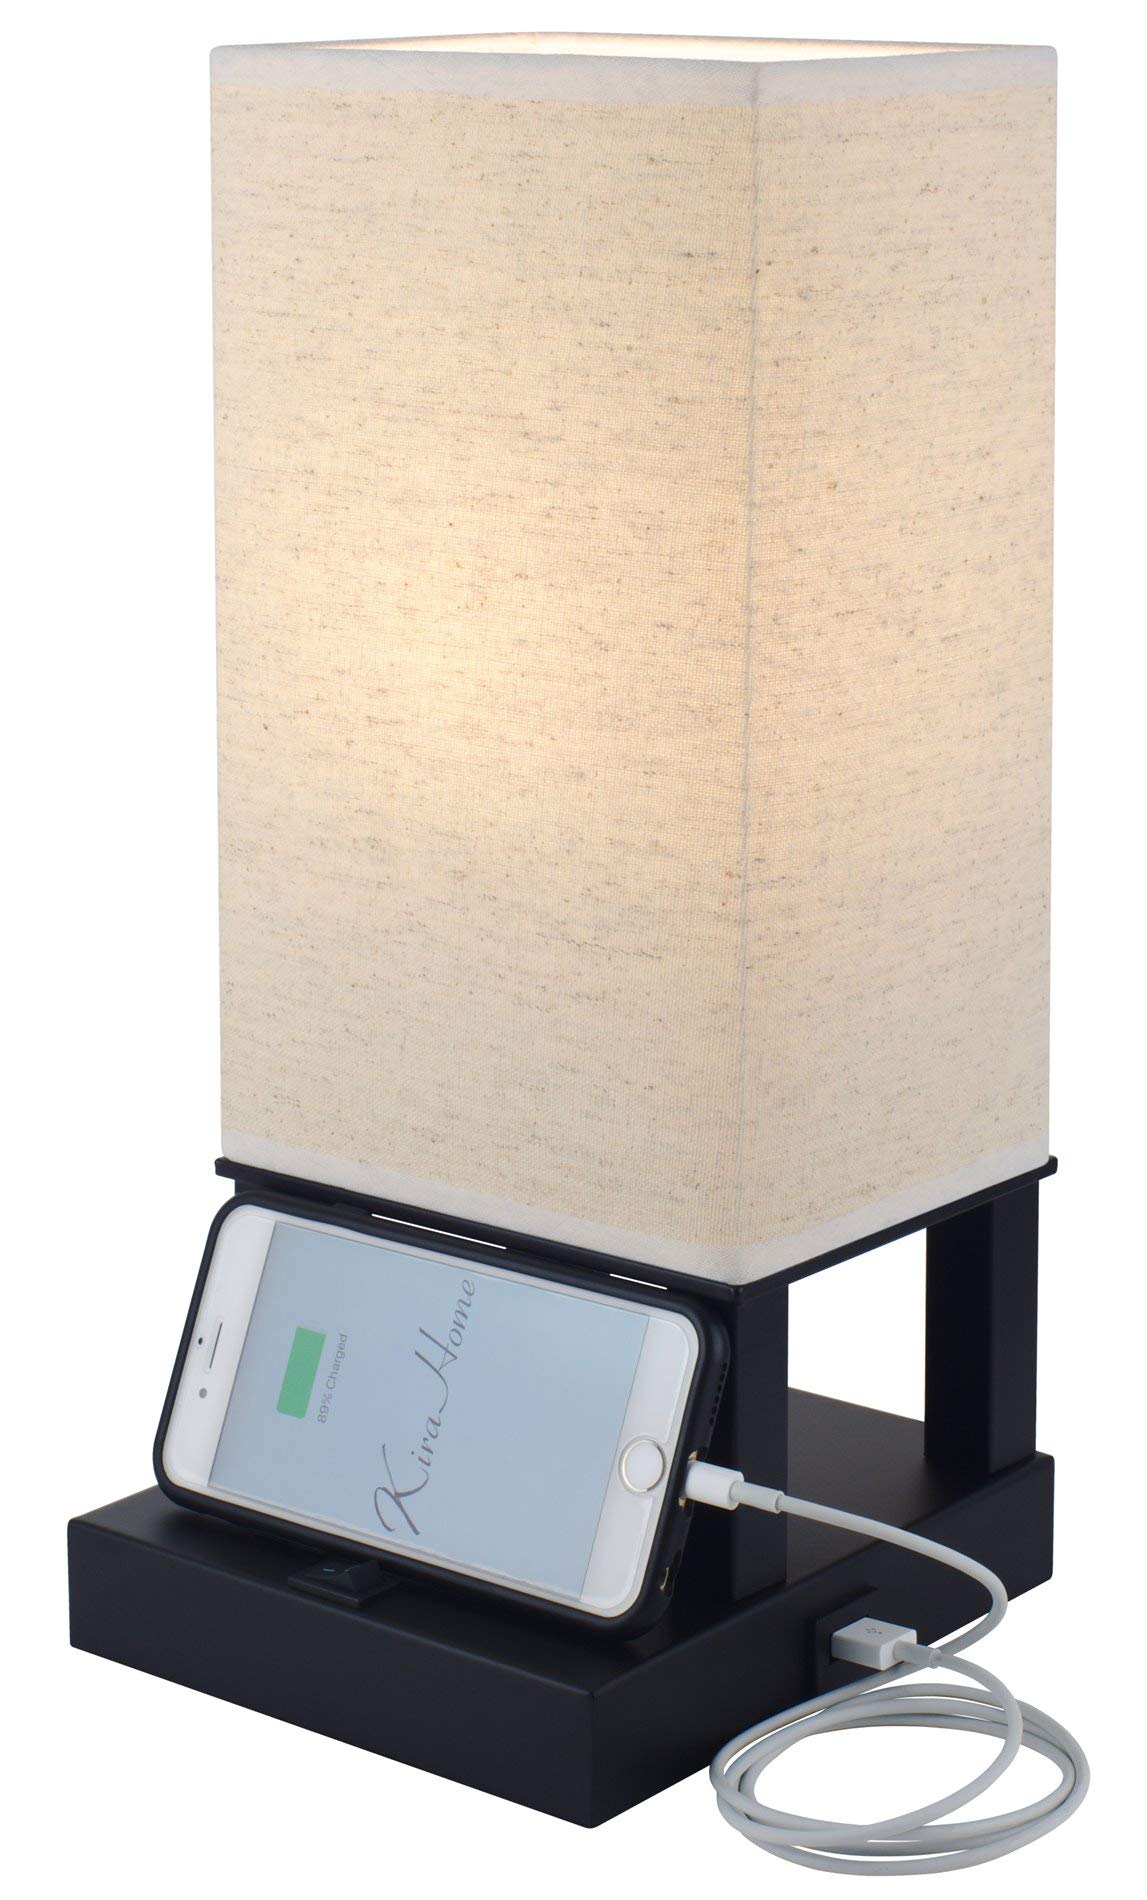 Kira Home Lucerna 13" Touch Bedside LED Table Lamp, Energy Efficient, Eco-Friendly, Wood Style Finish + Honey Beige Shade